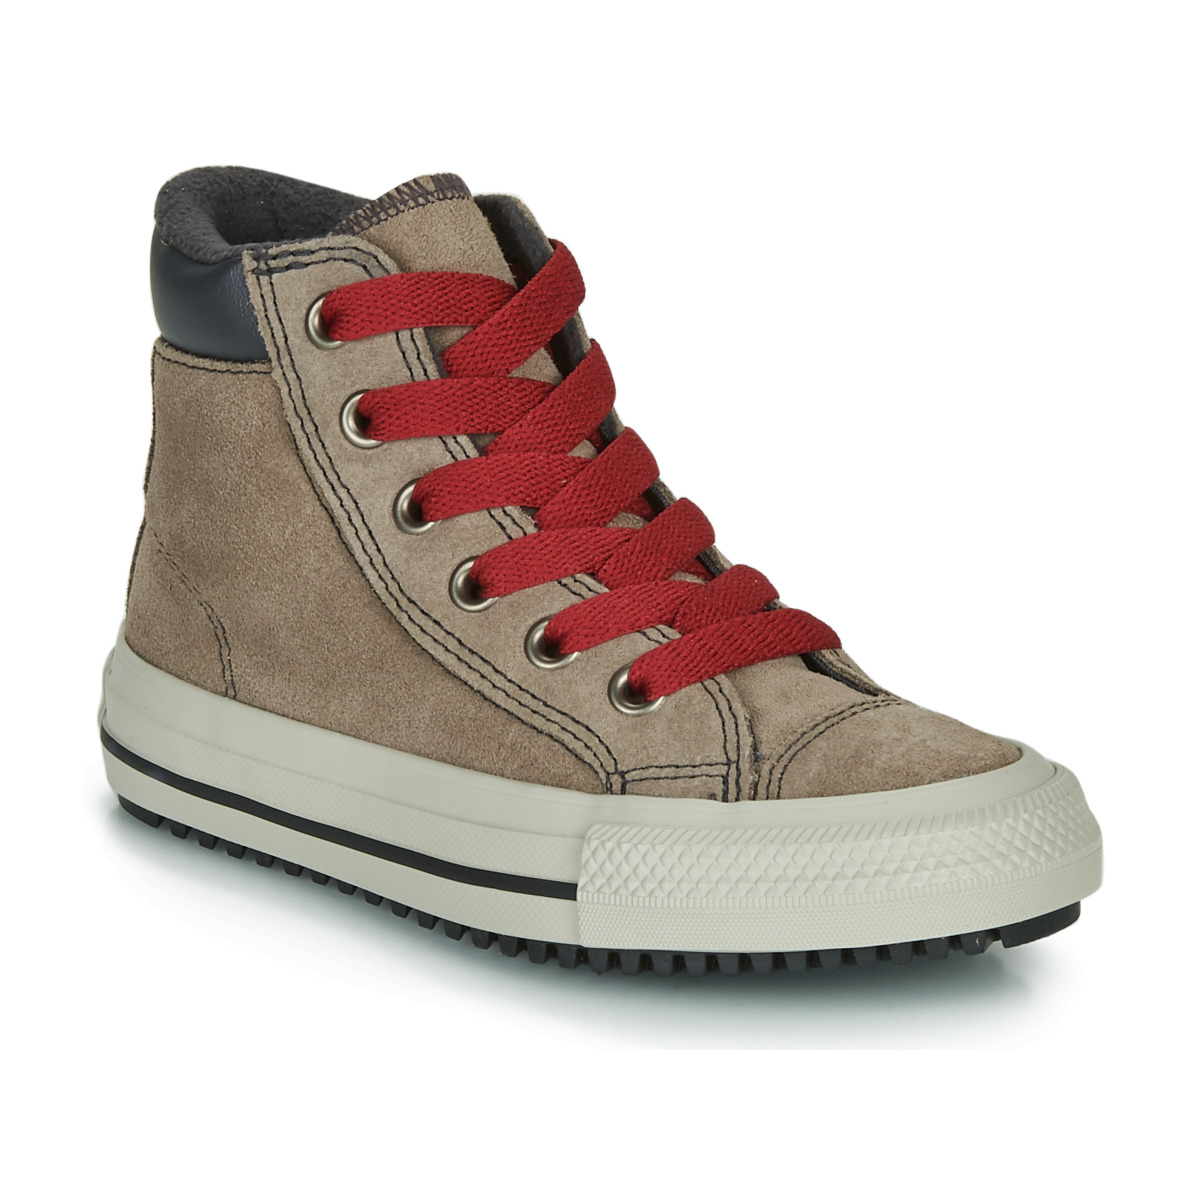 Converse Chuck Taylor All Star Pc Boot Boots On Mars - Hi Brown